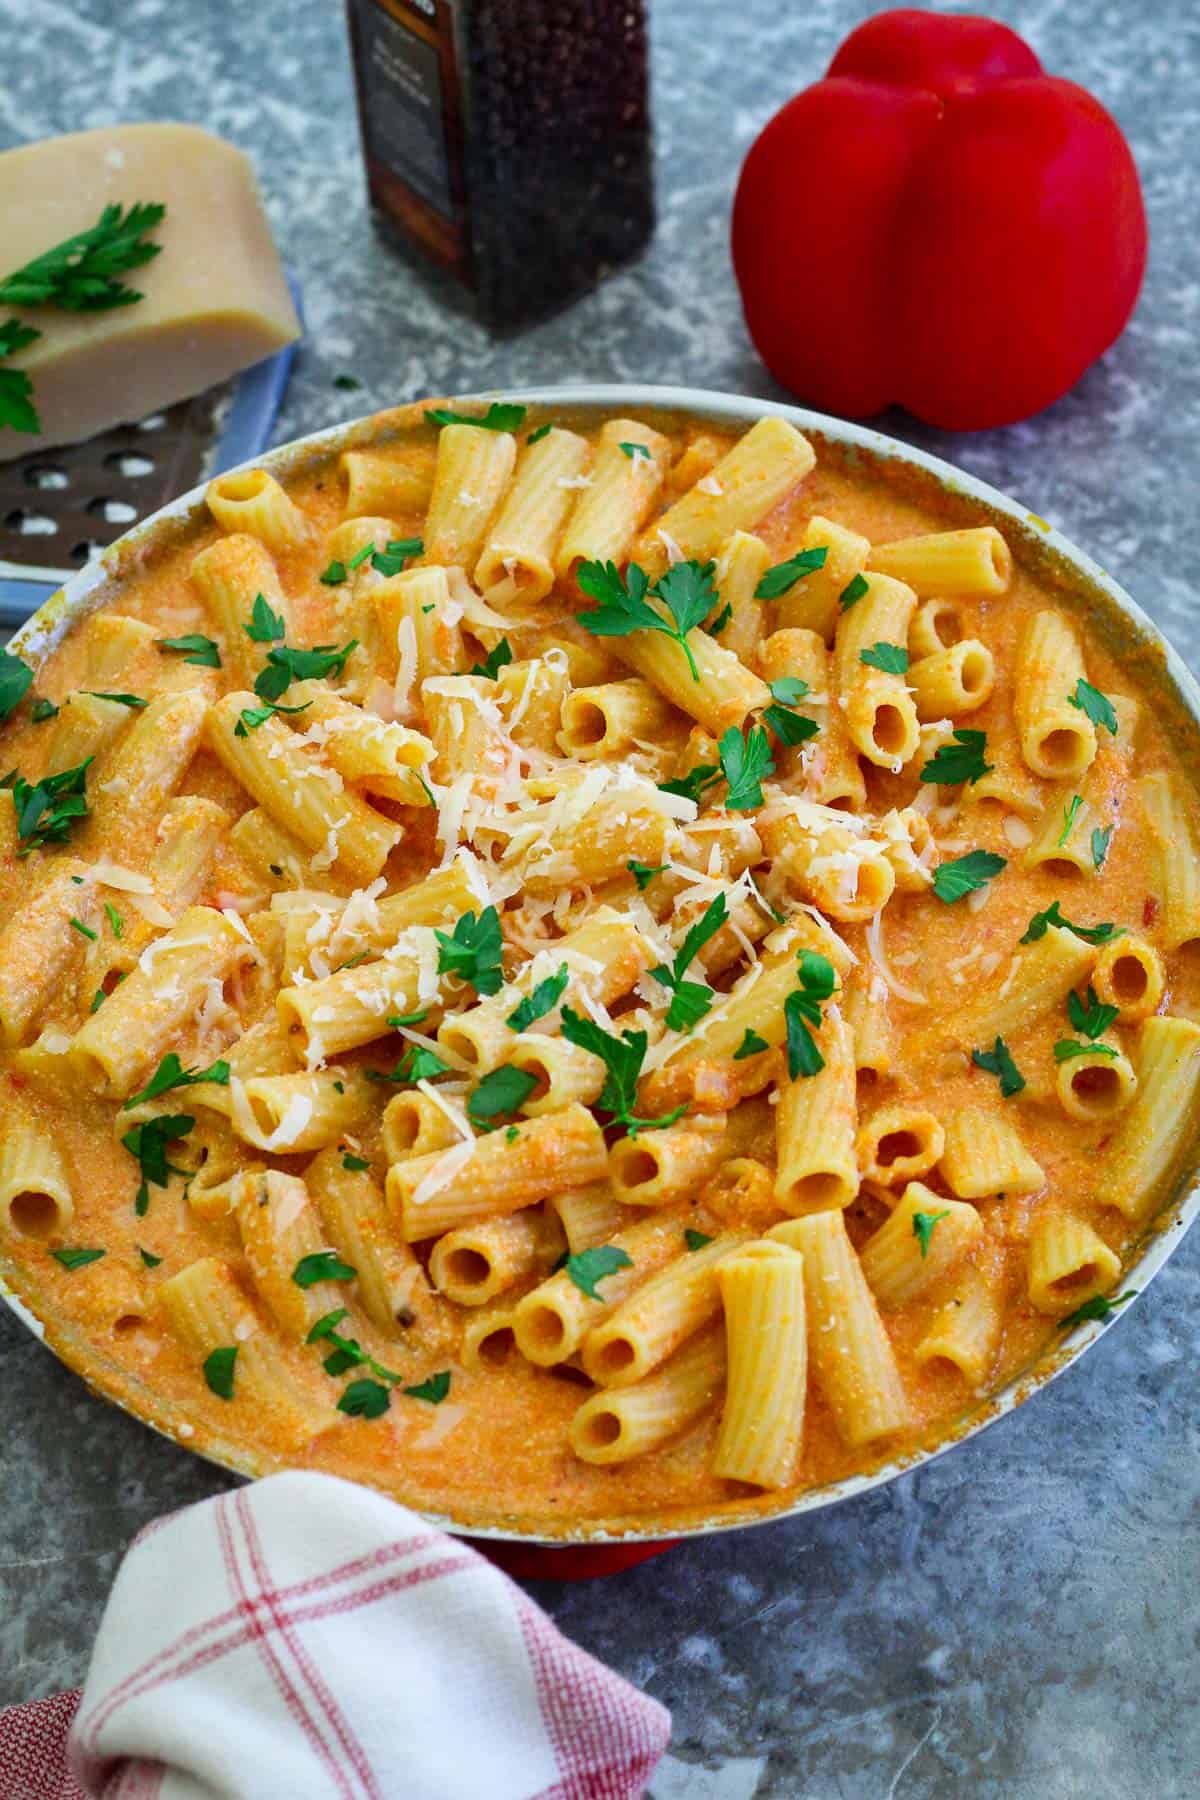 Skillet with rigatoni in an orange, creamy sauce. There's parsley and cheese over the pasta, ready for serving.